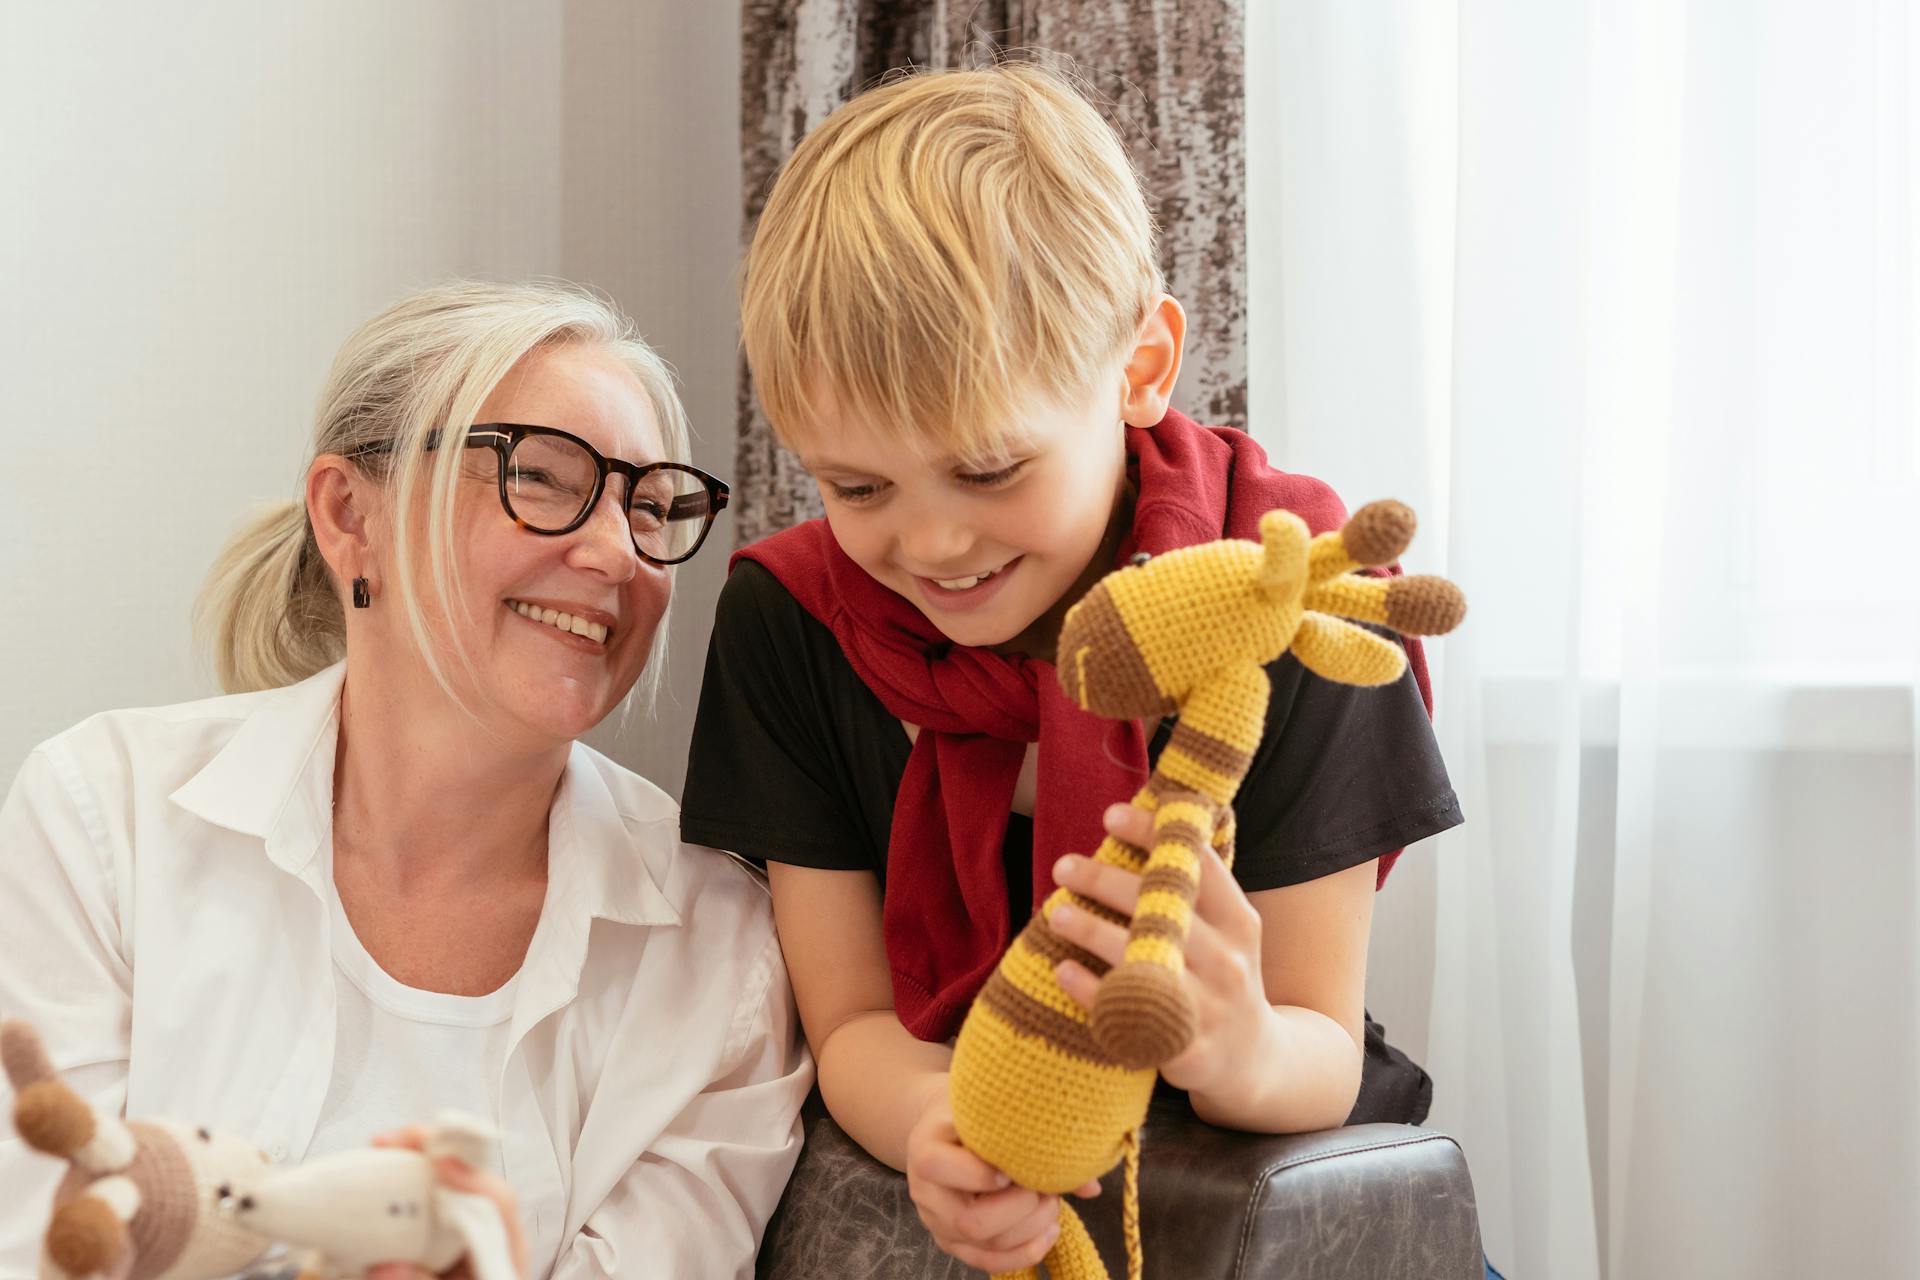 An elderly woman with her grandson | Source: Pexels